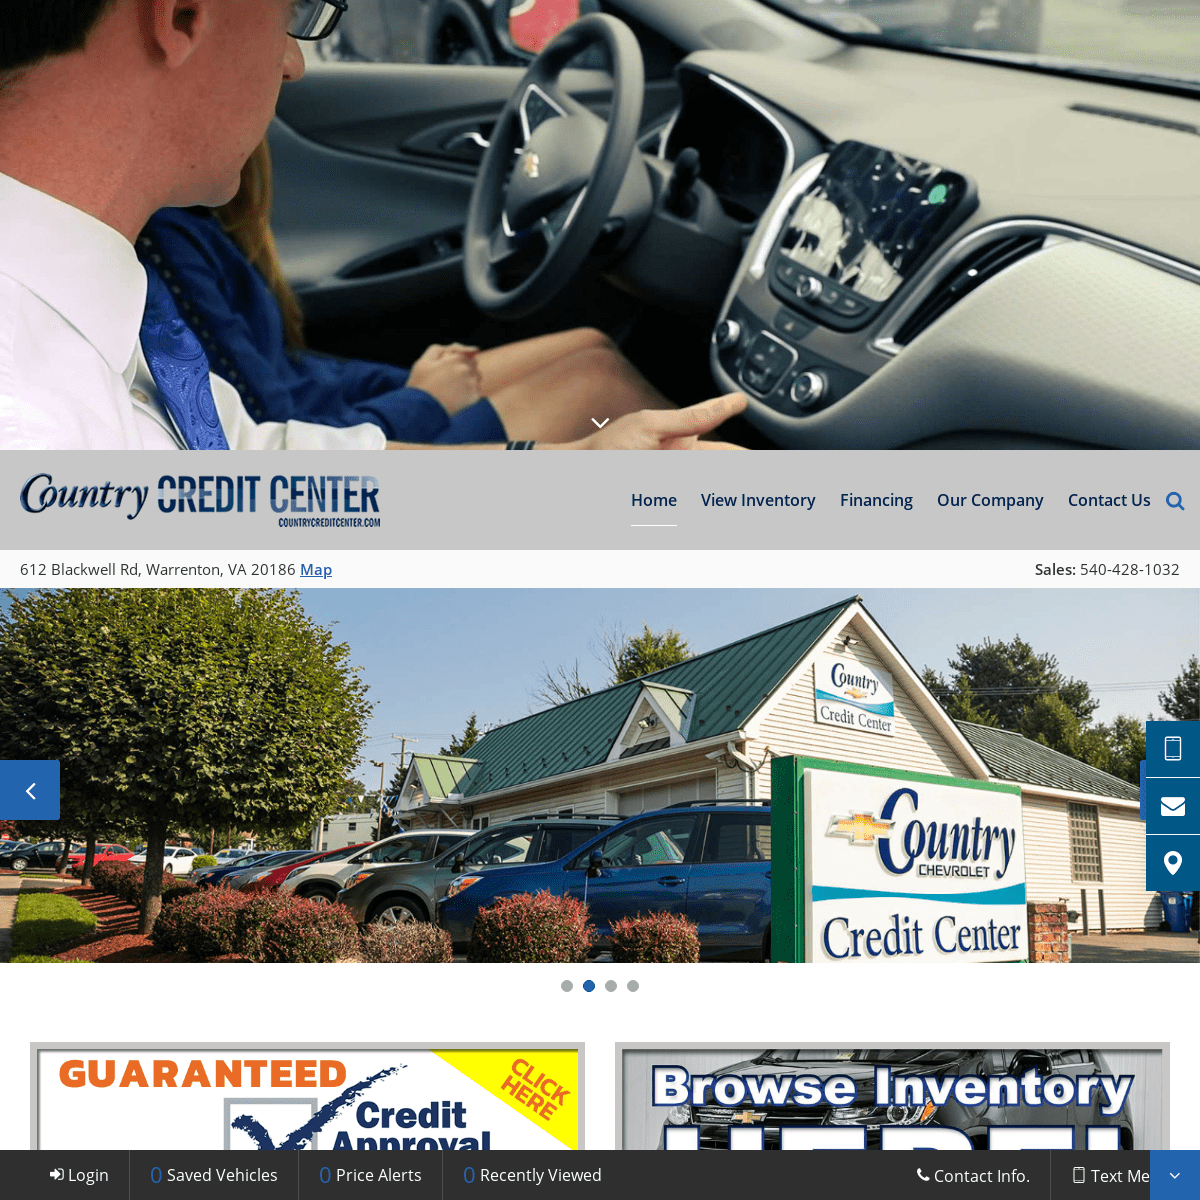 A complete backup of countrycreditcenter.com